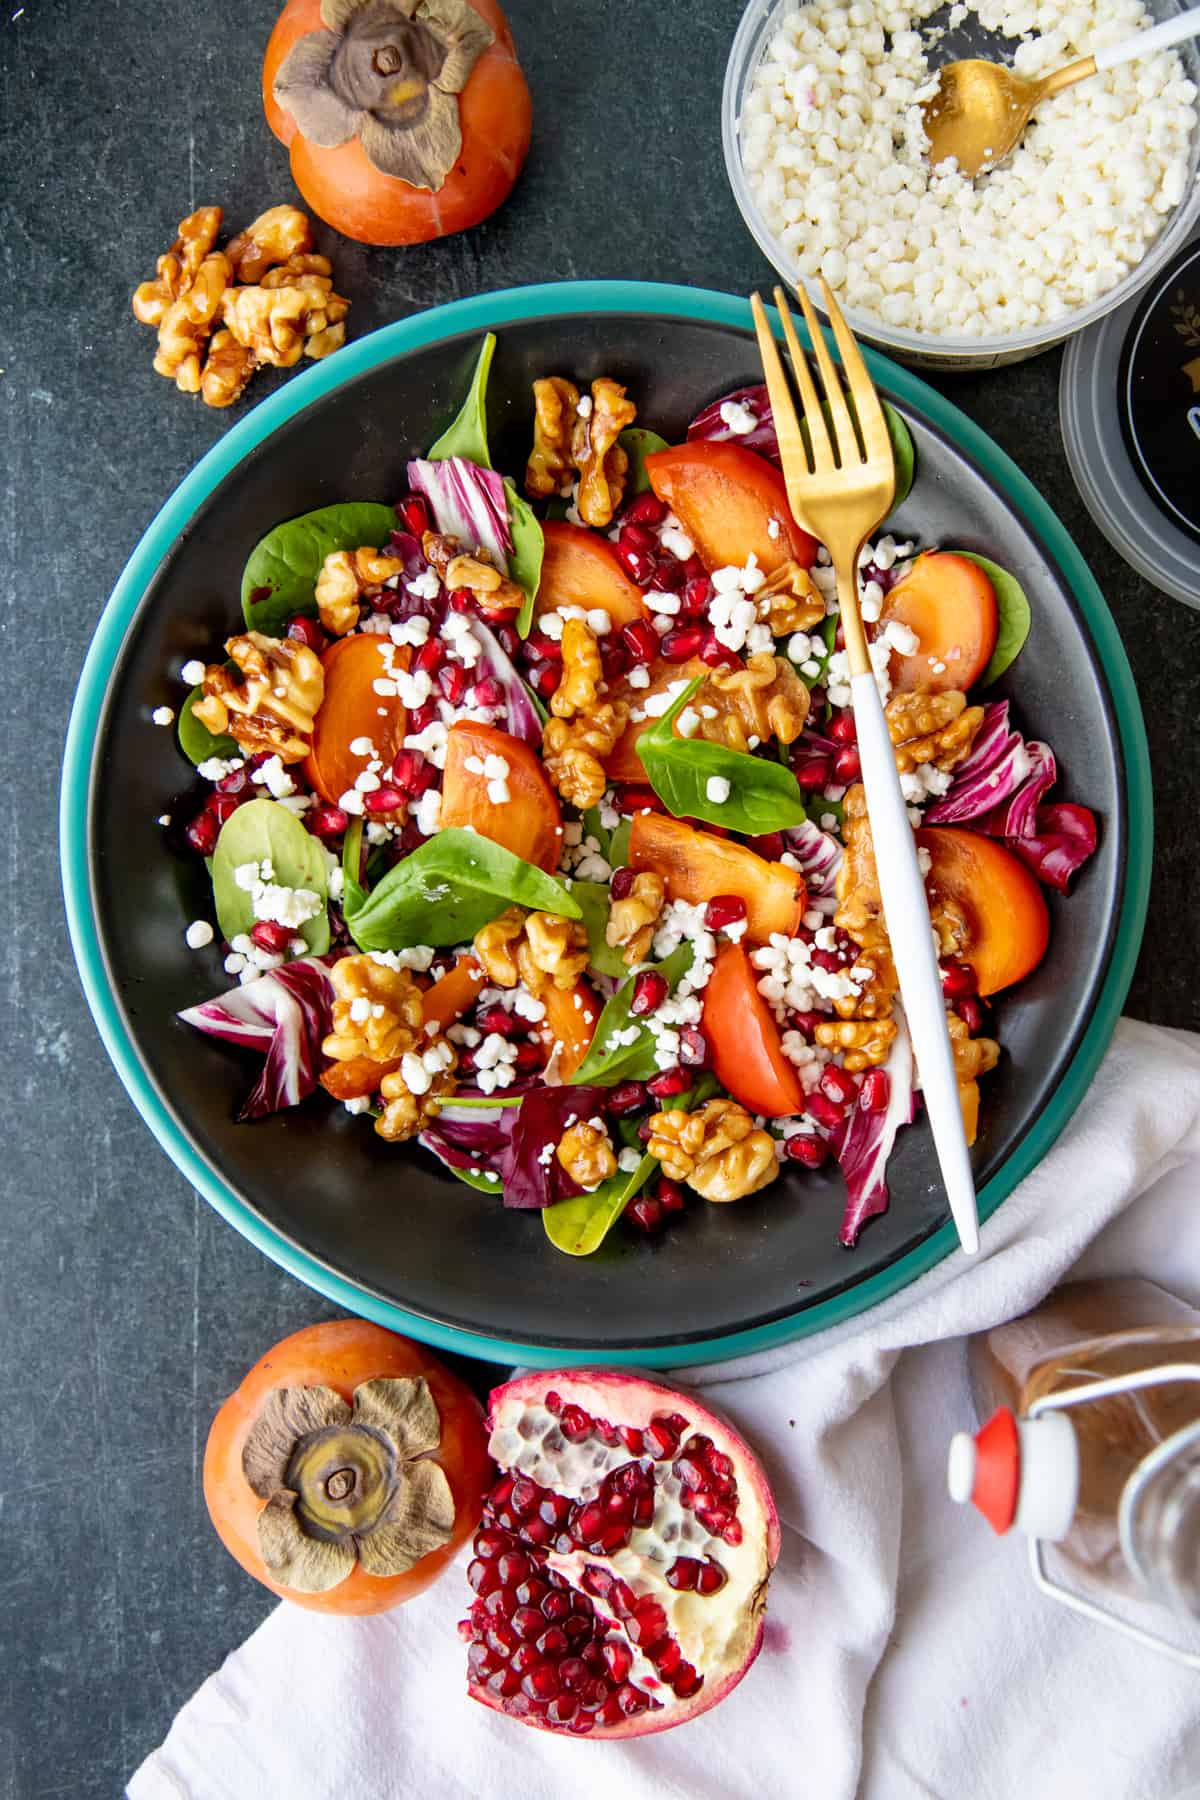 A fork rests on a dark bowl, filled with persimmon and pomegranate salad.